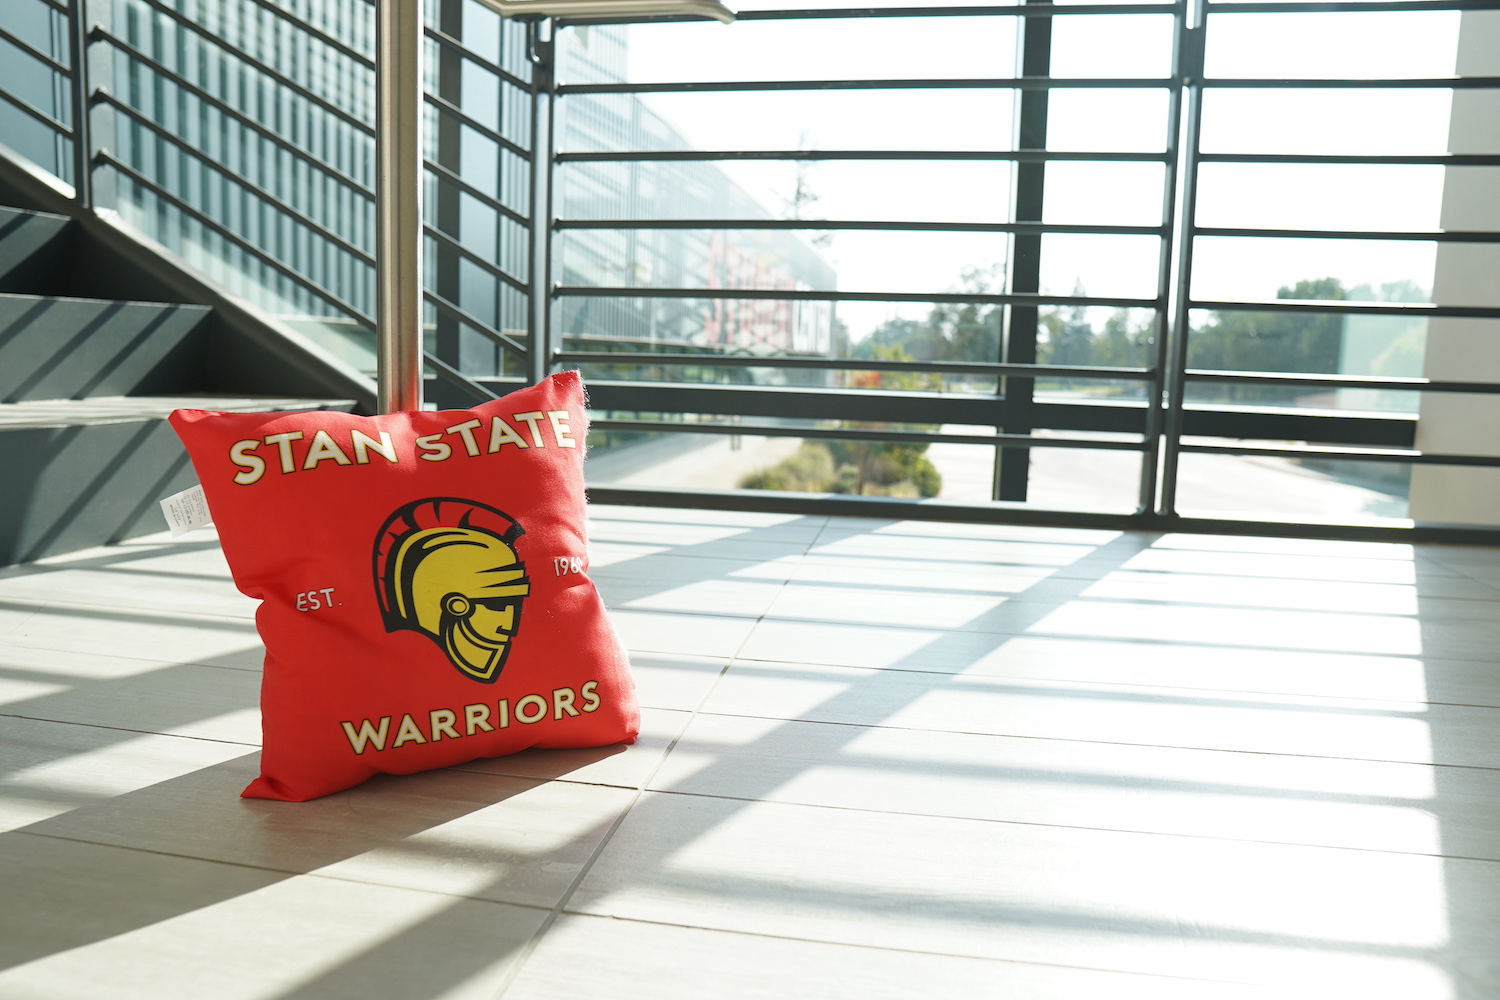 A pillow with the Stan State Warrior symbol is set by the window